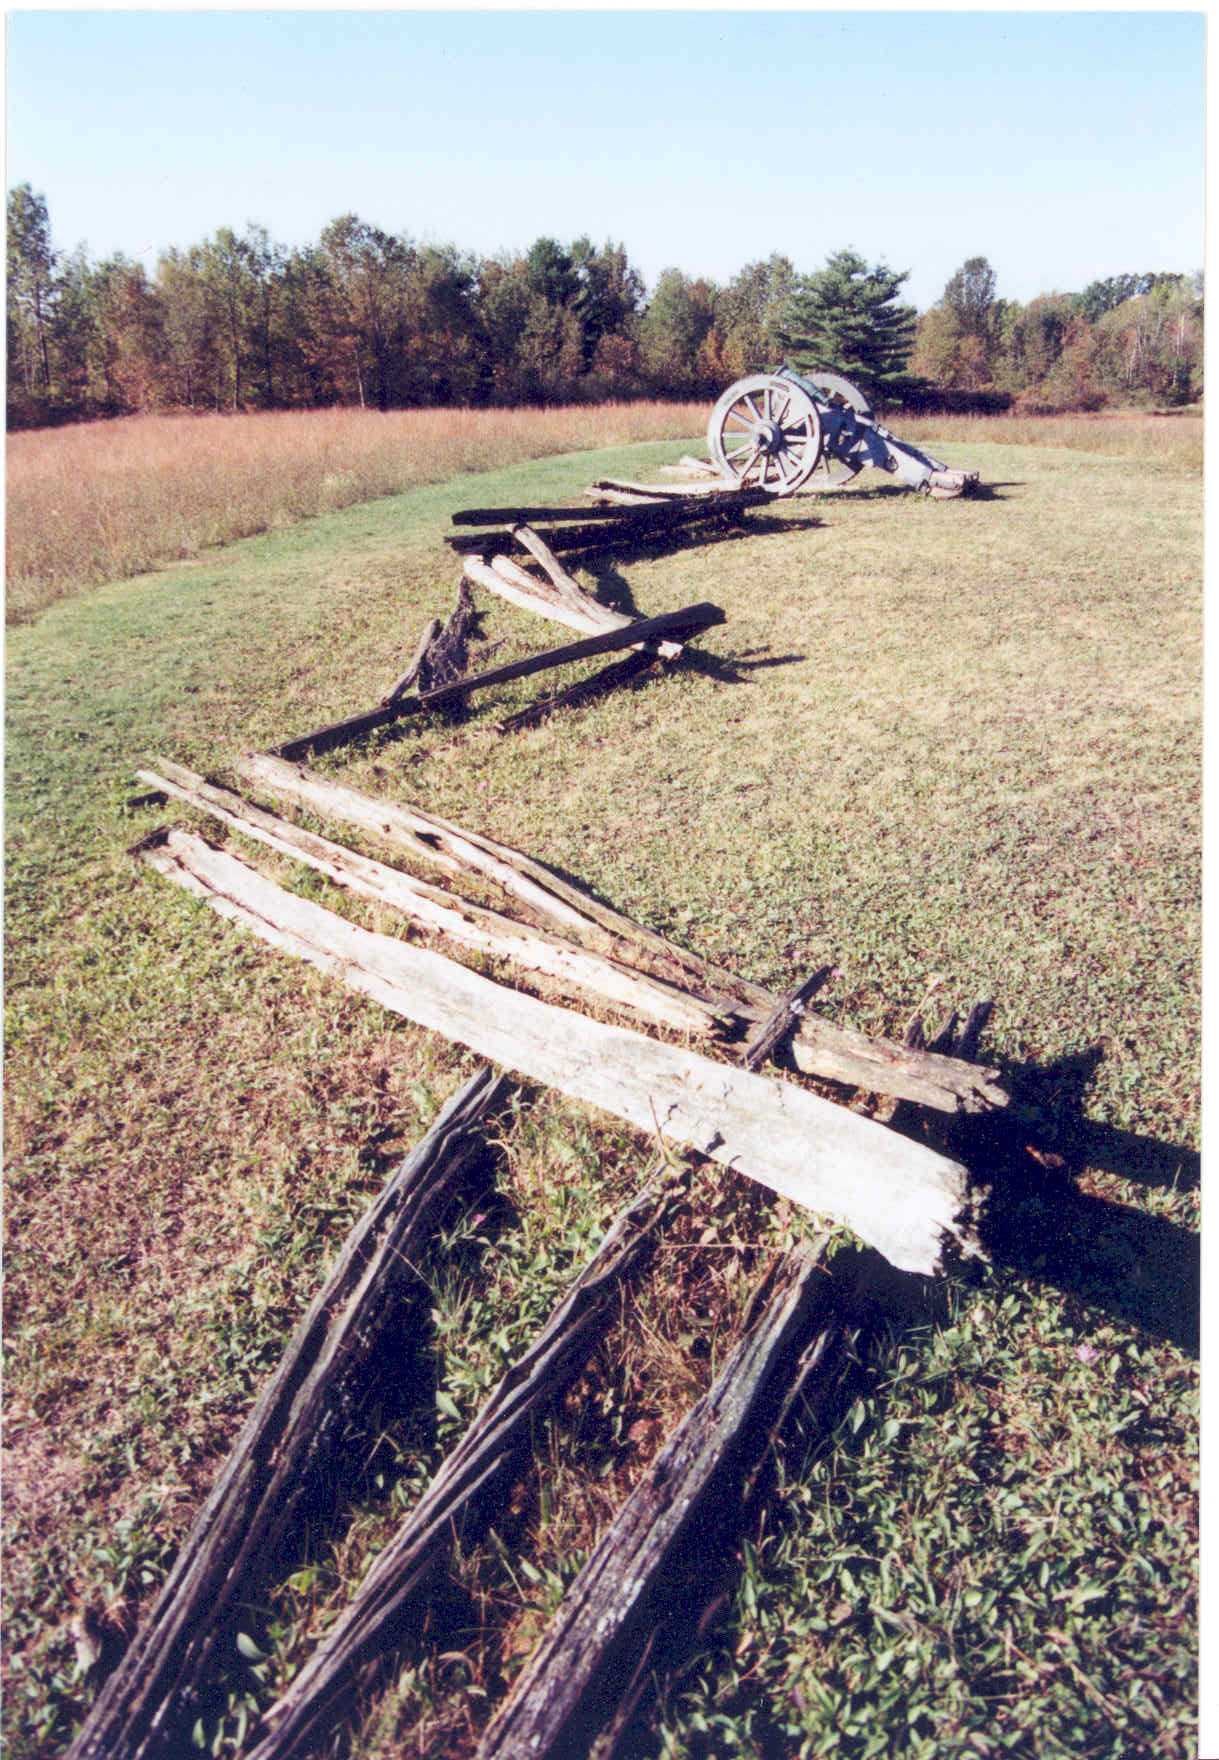 A wooden fence runs into the distance, separating two fields. A cannon sits in the distance next to the fence.